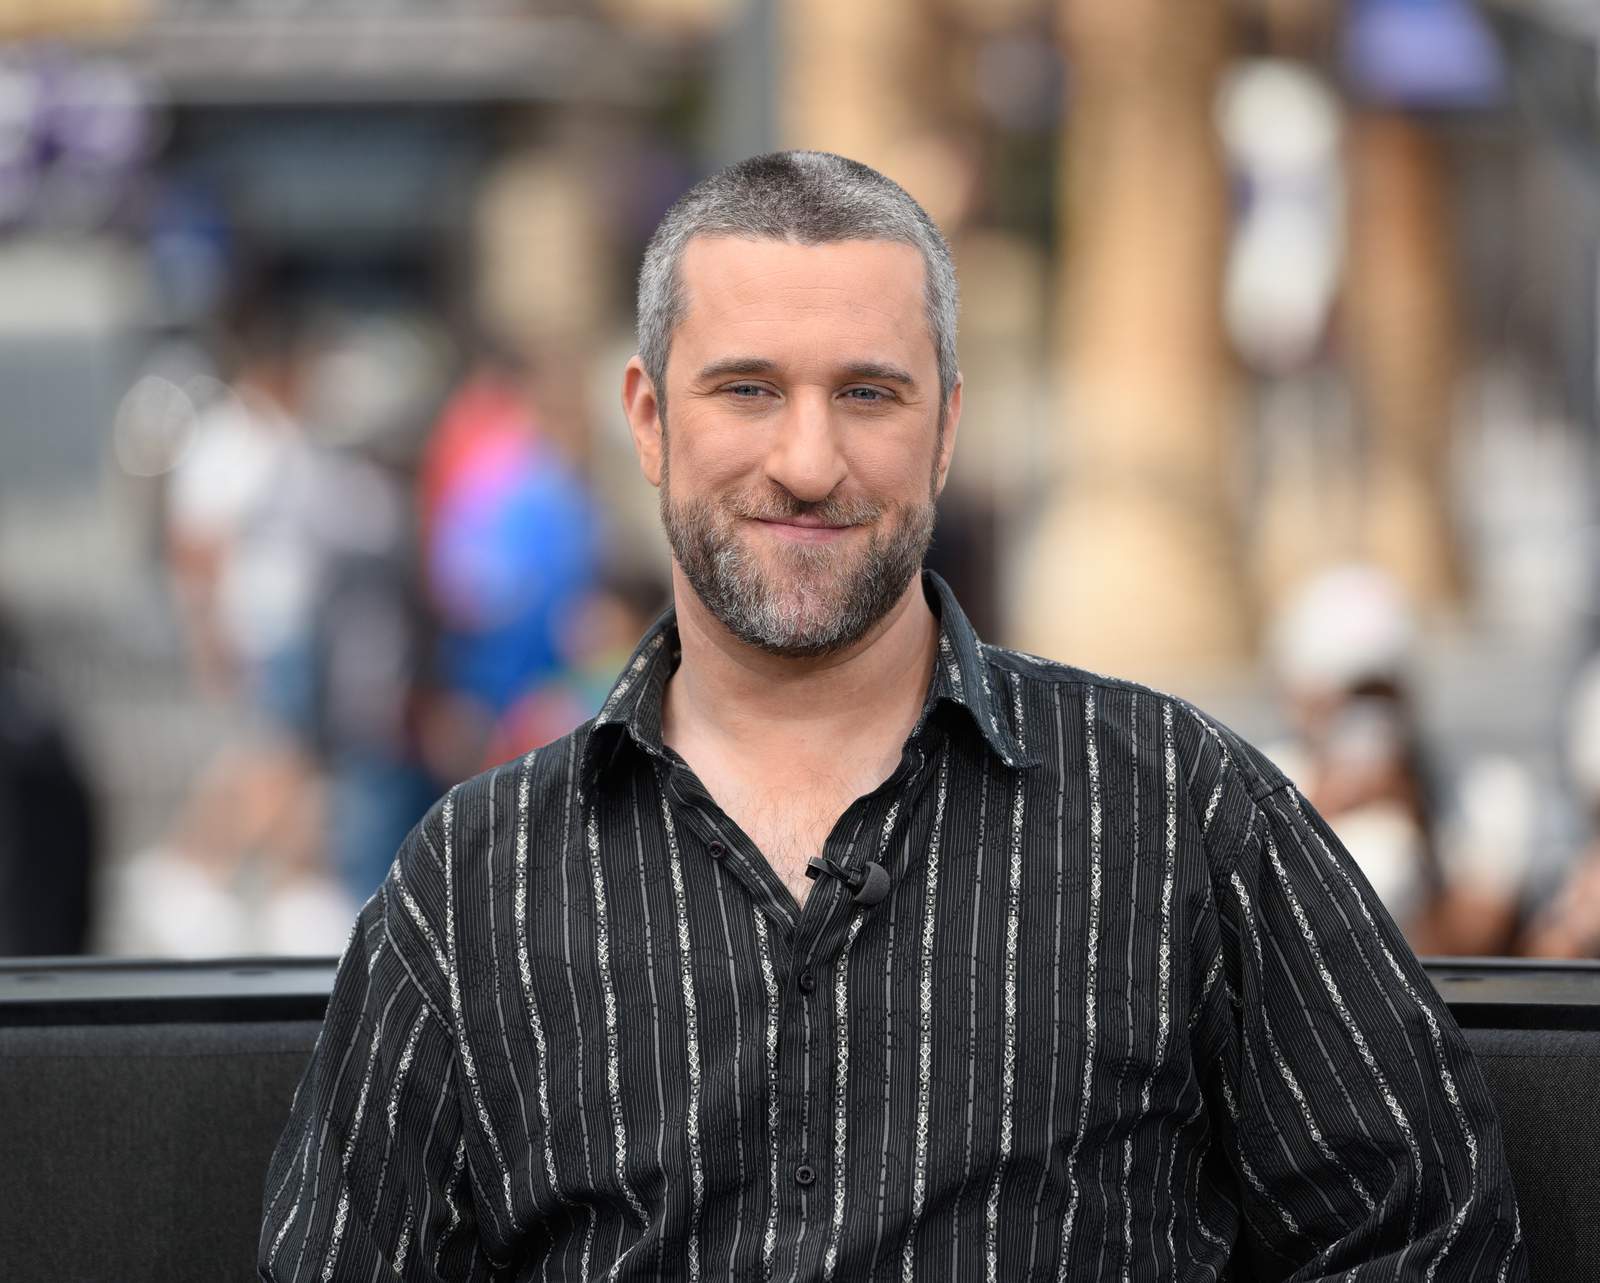 Celebrities react to the death of ‘Saved by the Bell’ actor Dustin Diamond